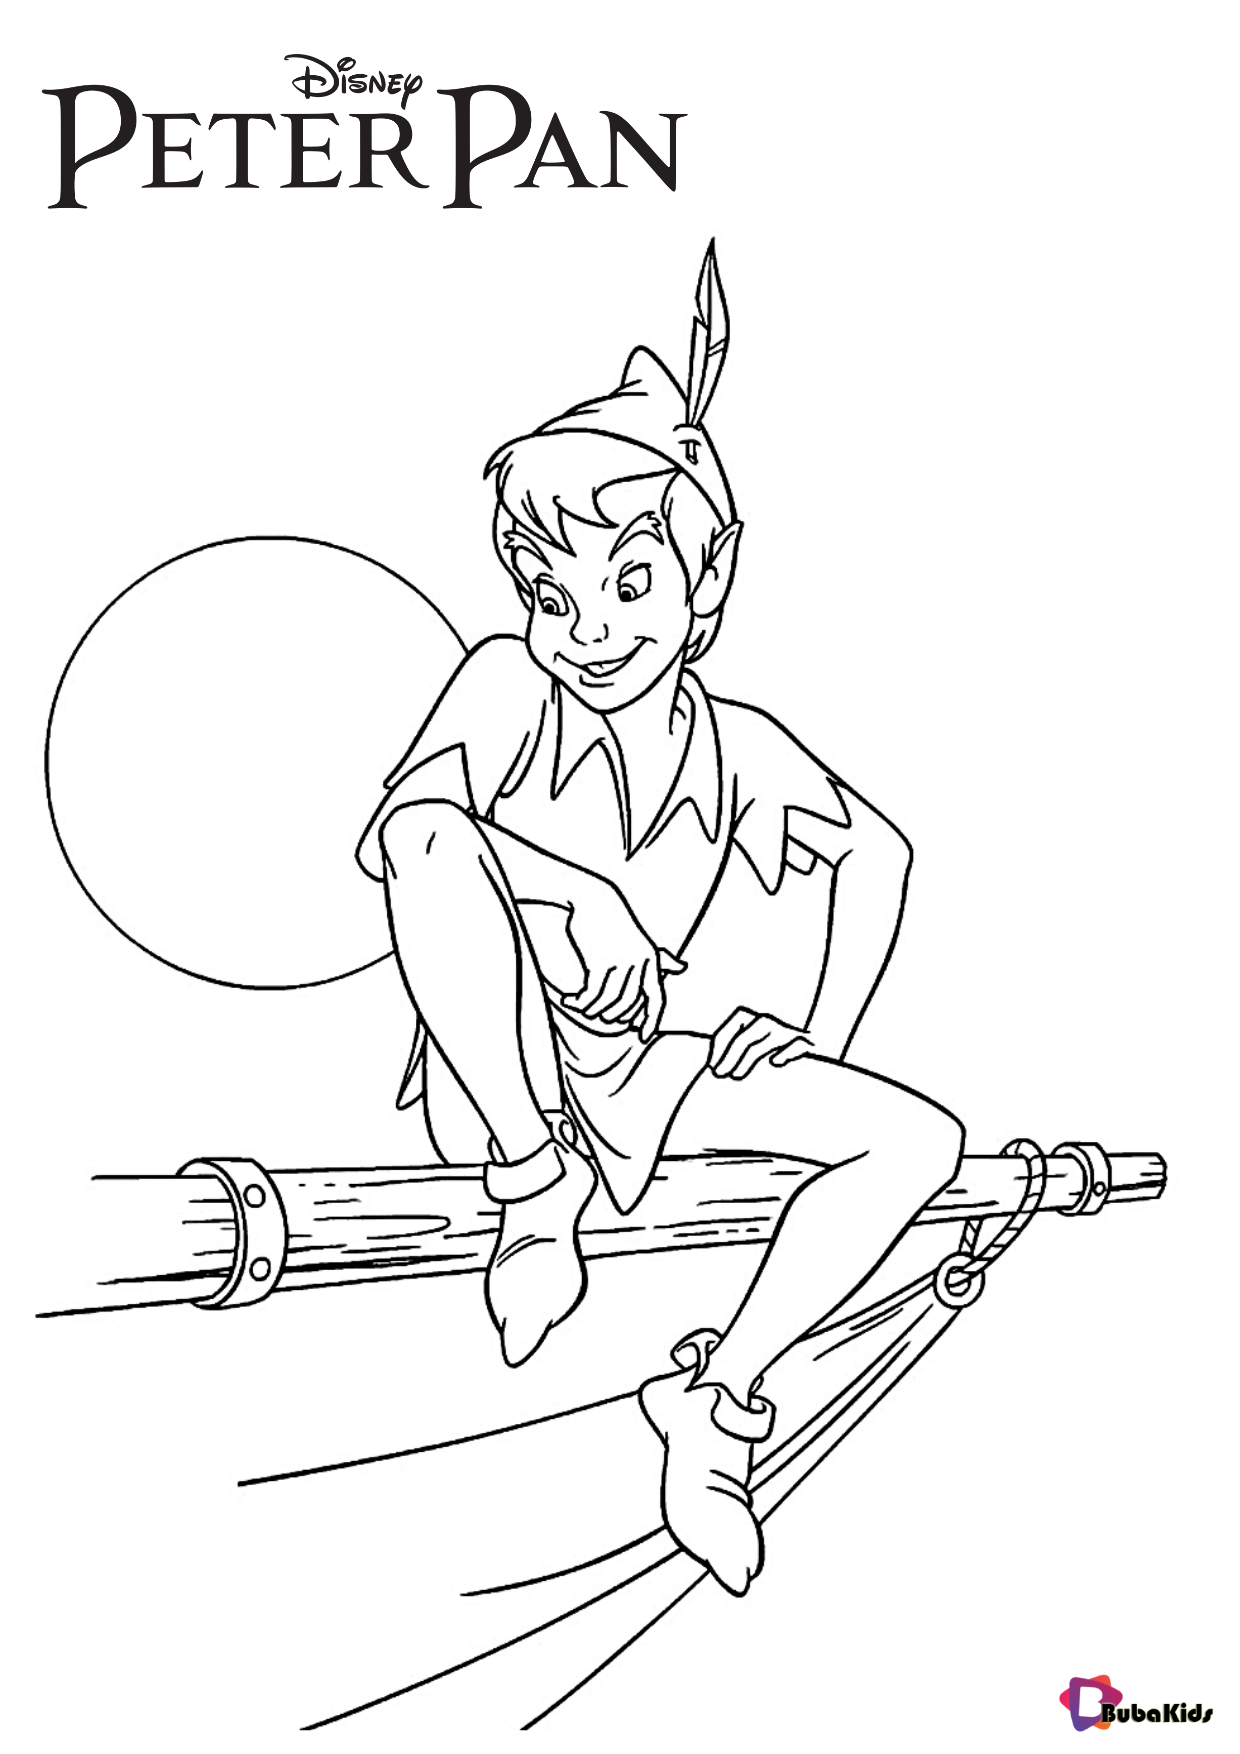 Peter Pan on pirate ship Jolly Roger coloring page Wallpaper